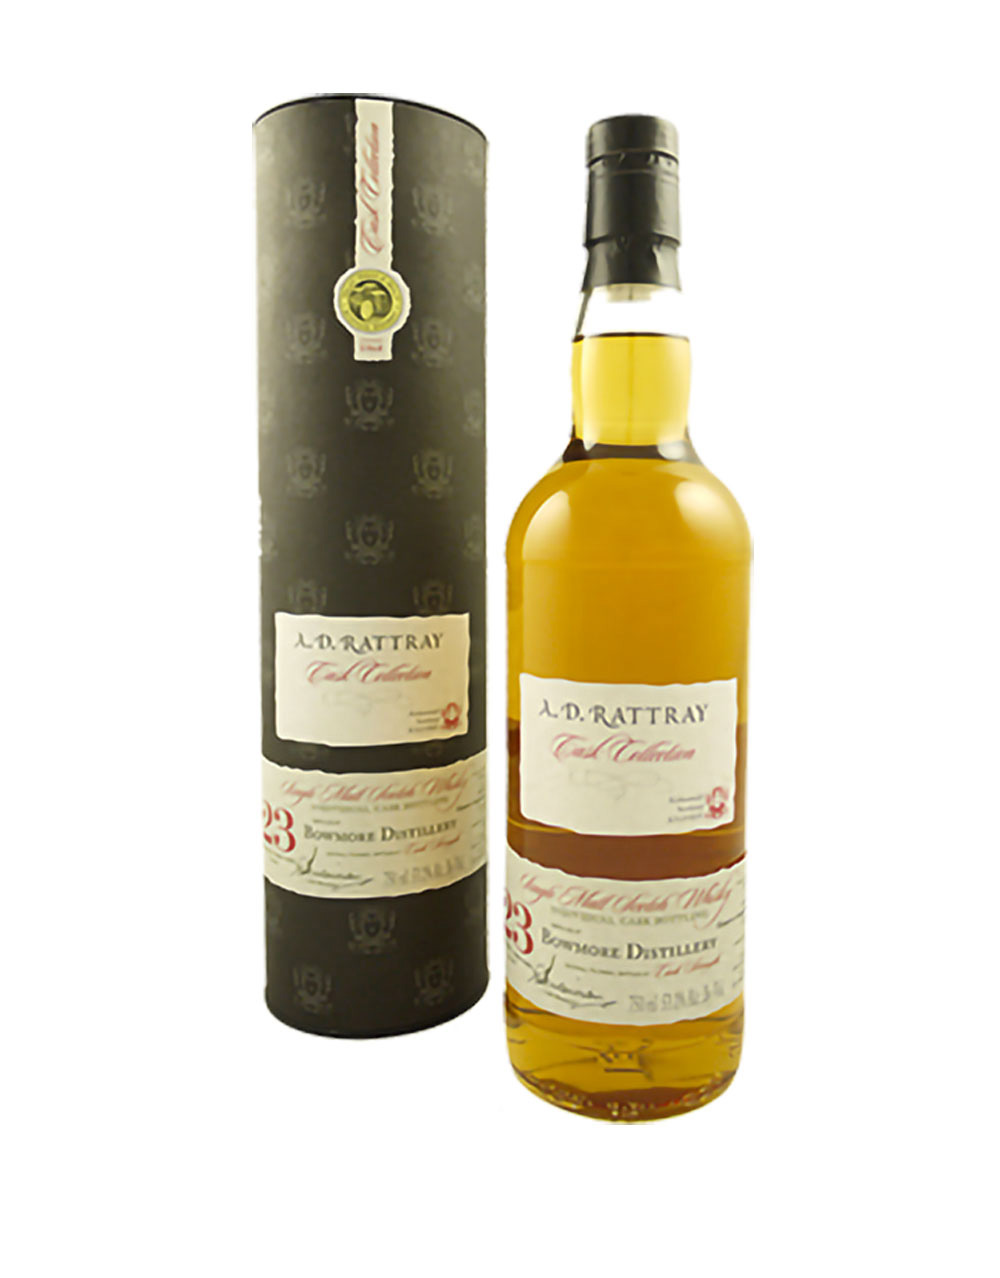 Bowmore 23 Year Old Single Malt Scotch Whisky (A.D. Rattray Bottling)